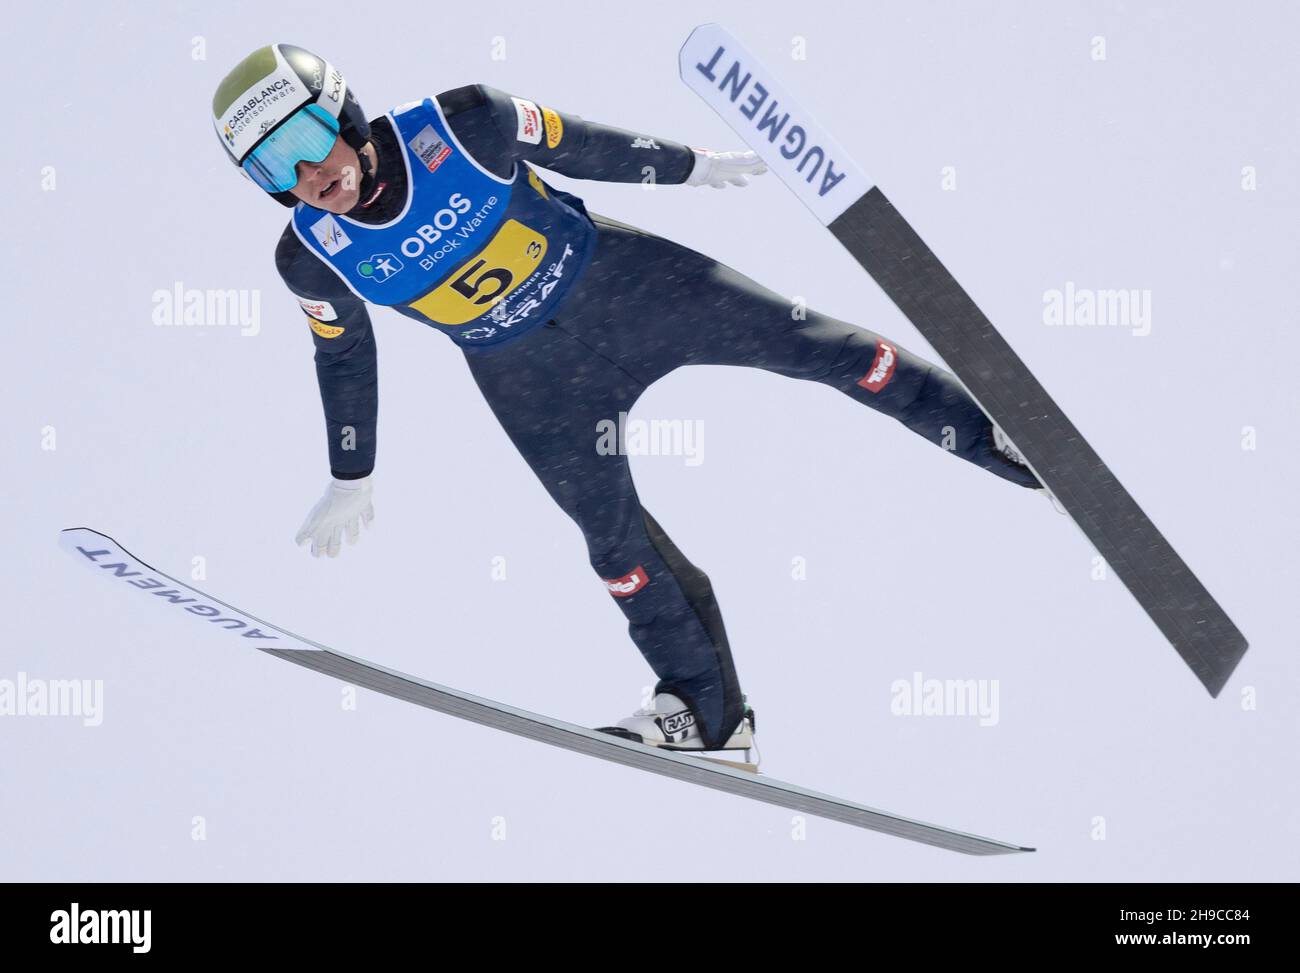 Lillehammer, Norway. 04th Dec, 2021. Lillehammer 20211204.Stefan Rettenegger (AUT) during the skijumping part of the Nordic ski combined team competition during the world cup in Lillehammer. Photo: Geir Olsen/NTB Credit: NTB Scanpix/Alamy Live News Stock Photo